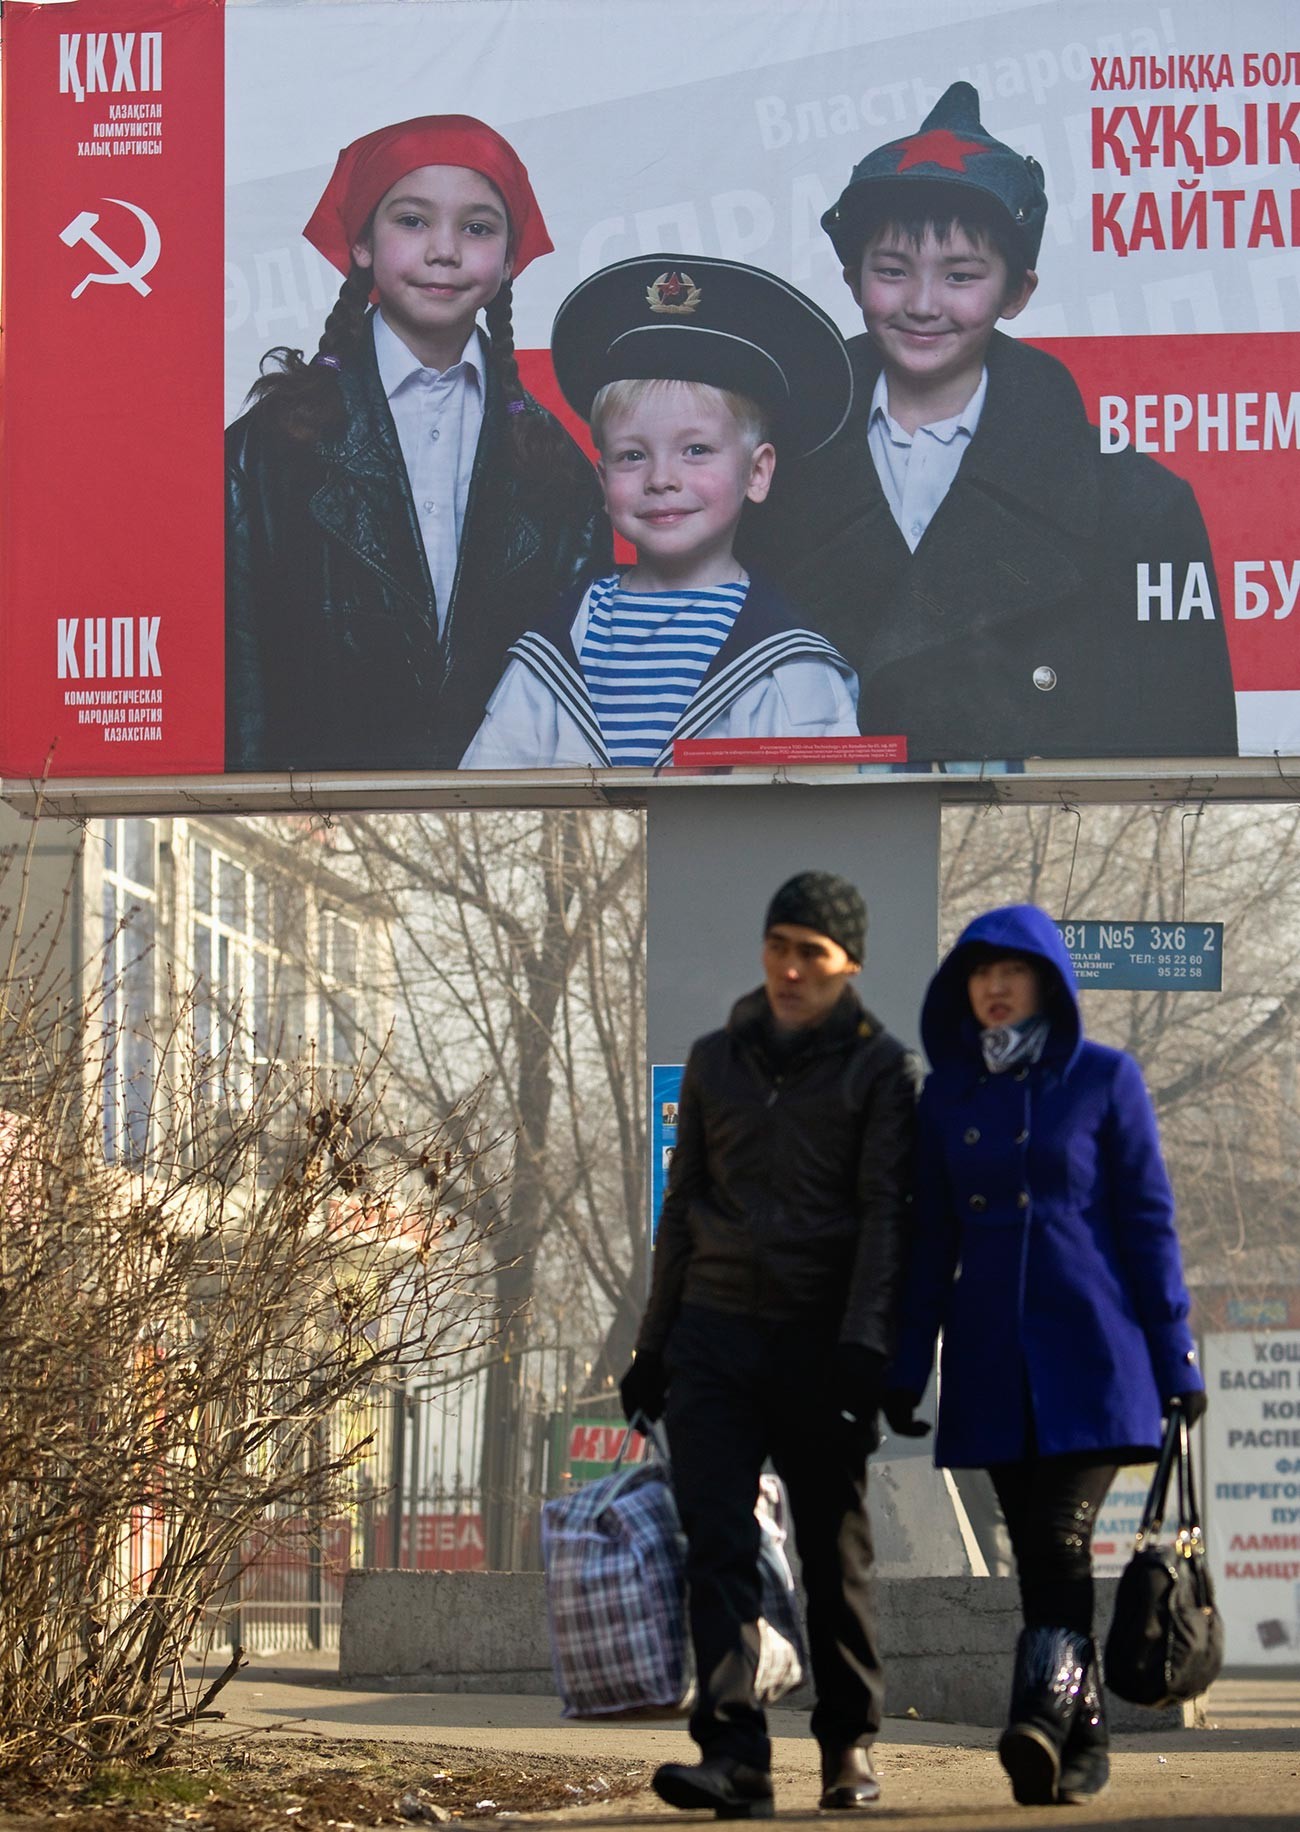 People pass by an election poster of the Communist People's Party of Kazakhstan (CPPK) in Almaty.